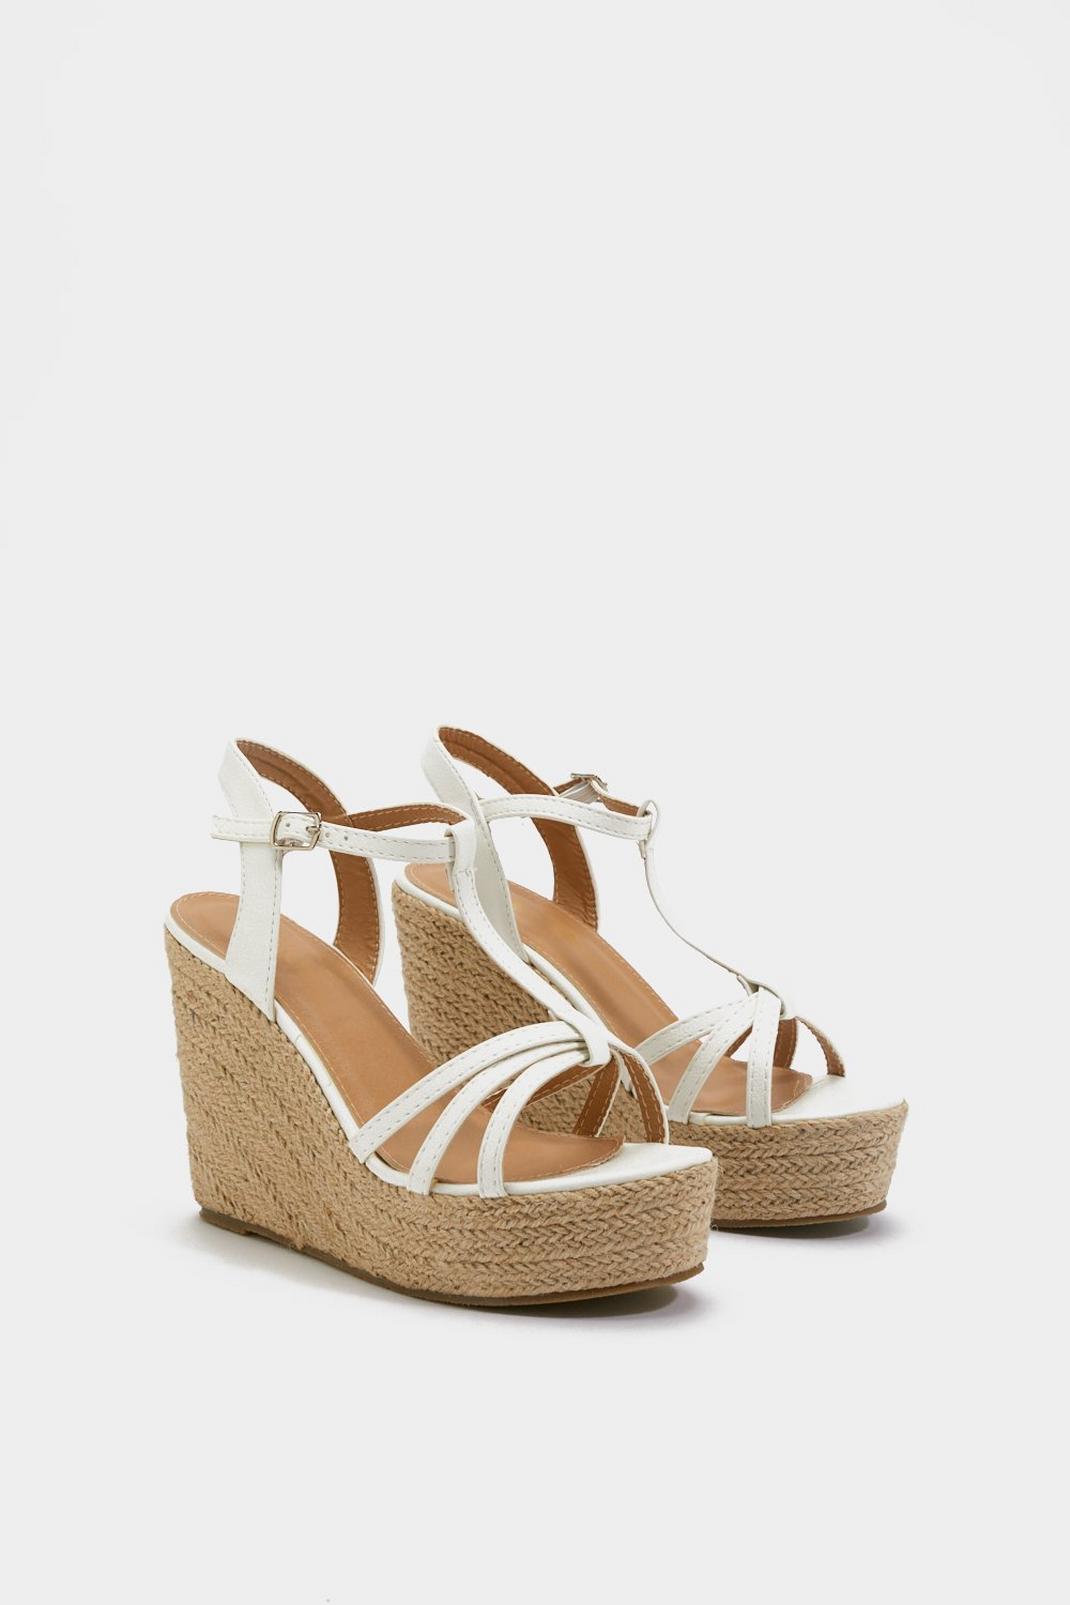 T Bar Strappy Wedges